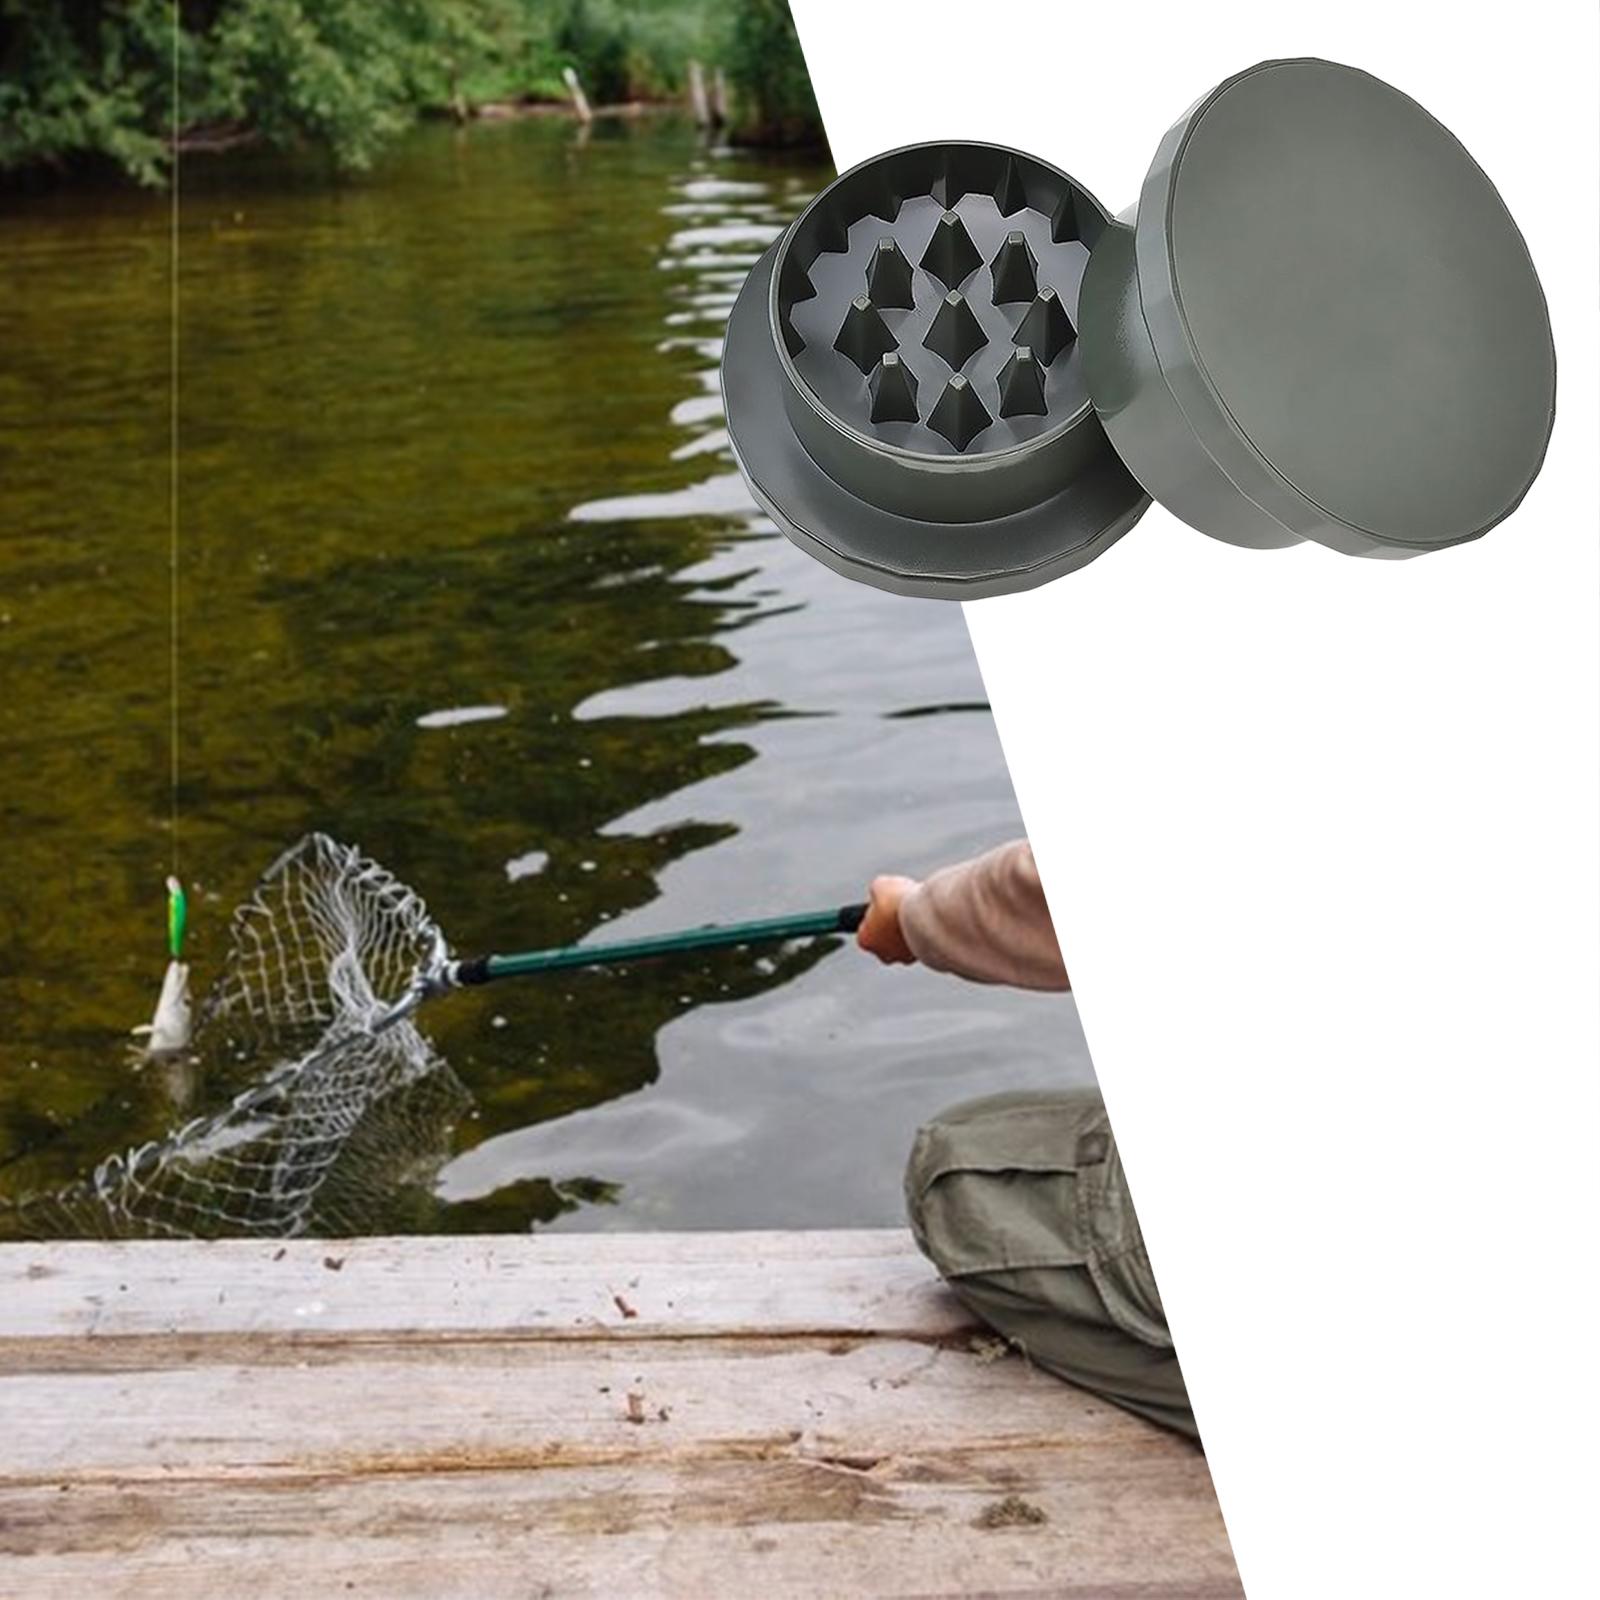 Bait Crusher Boilie Grinder Large Capacity Equipment Boilies Grinding Case Fishing Tackle Accessories for Groundbait Fishermen